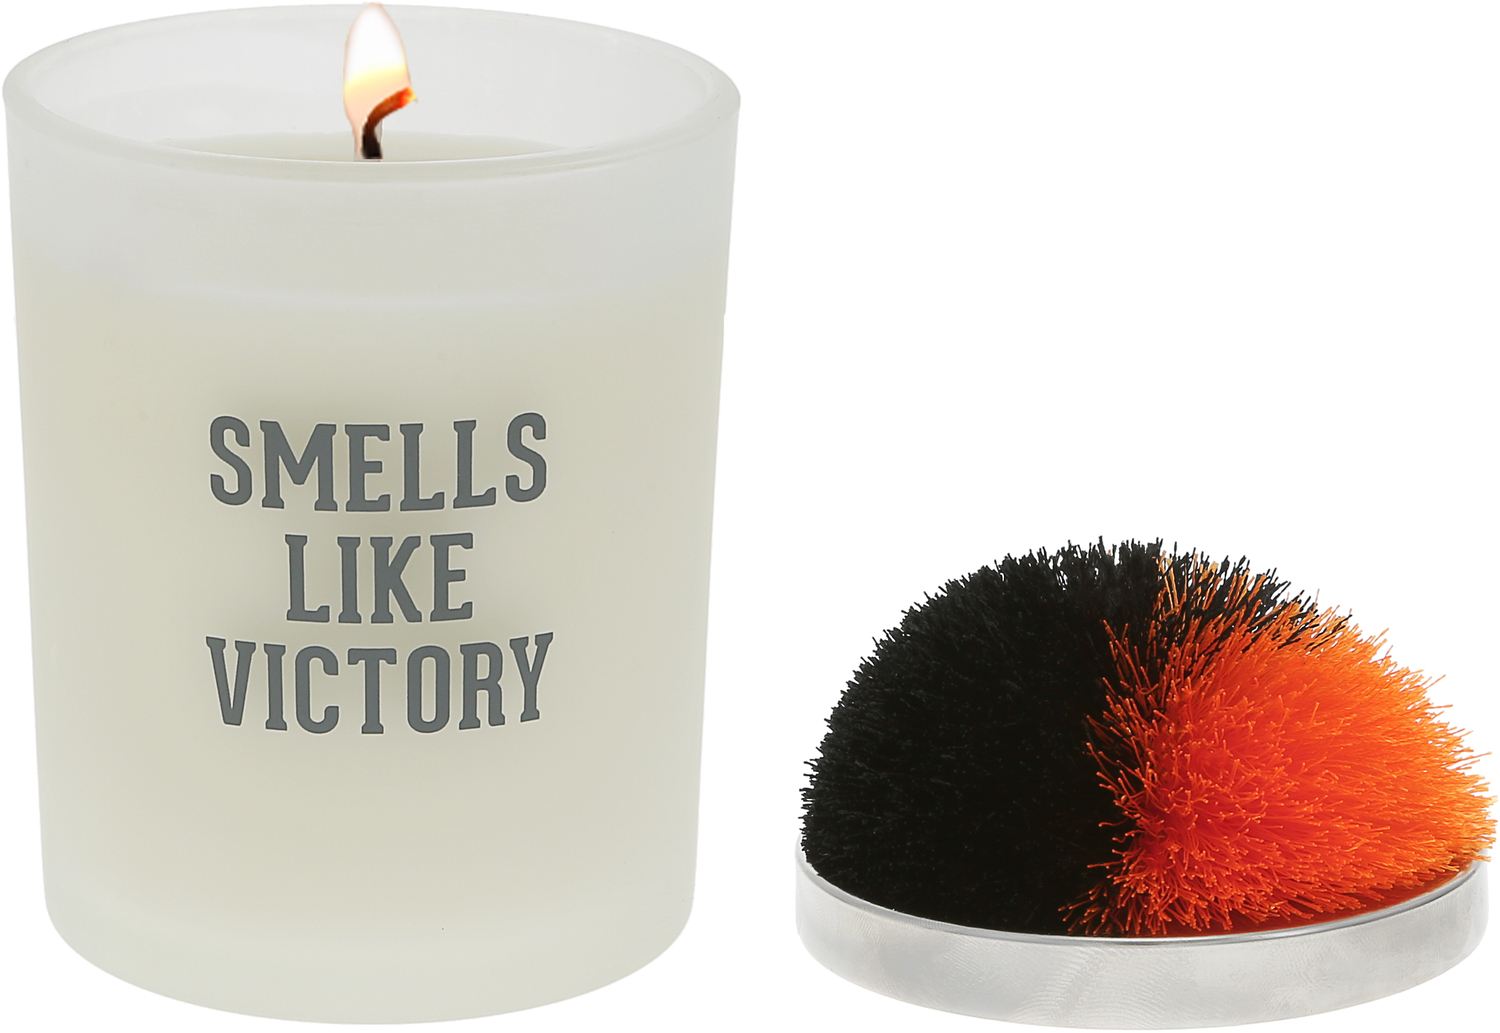 Victory - Black & Orange by Repre-Scent - Victory - Black & Orange - 5.5 oz - 100% Soy Wax Candle with Pom Pom Lid
Scent: Tranquility